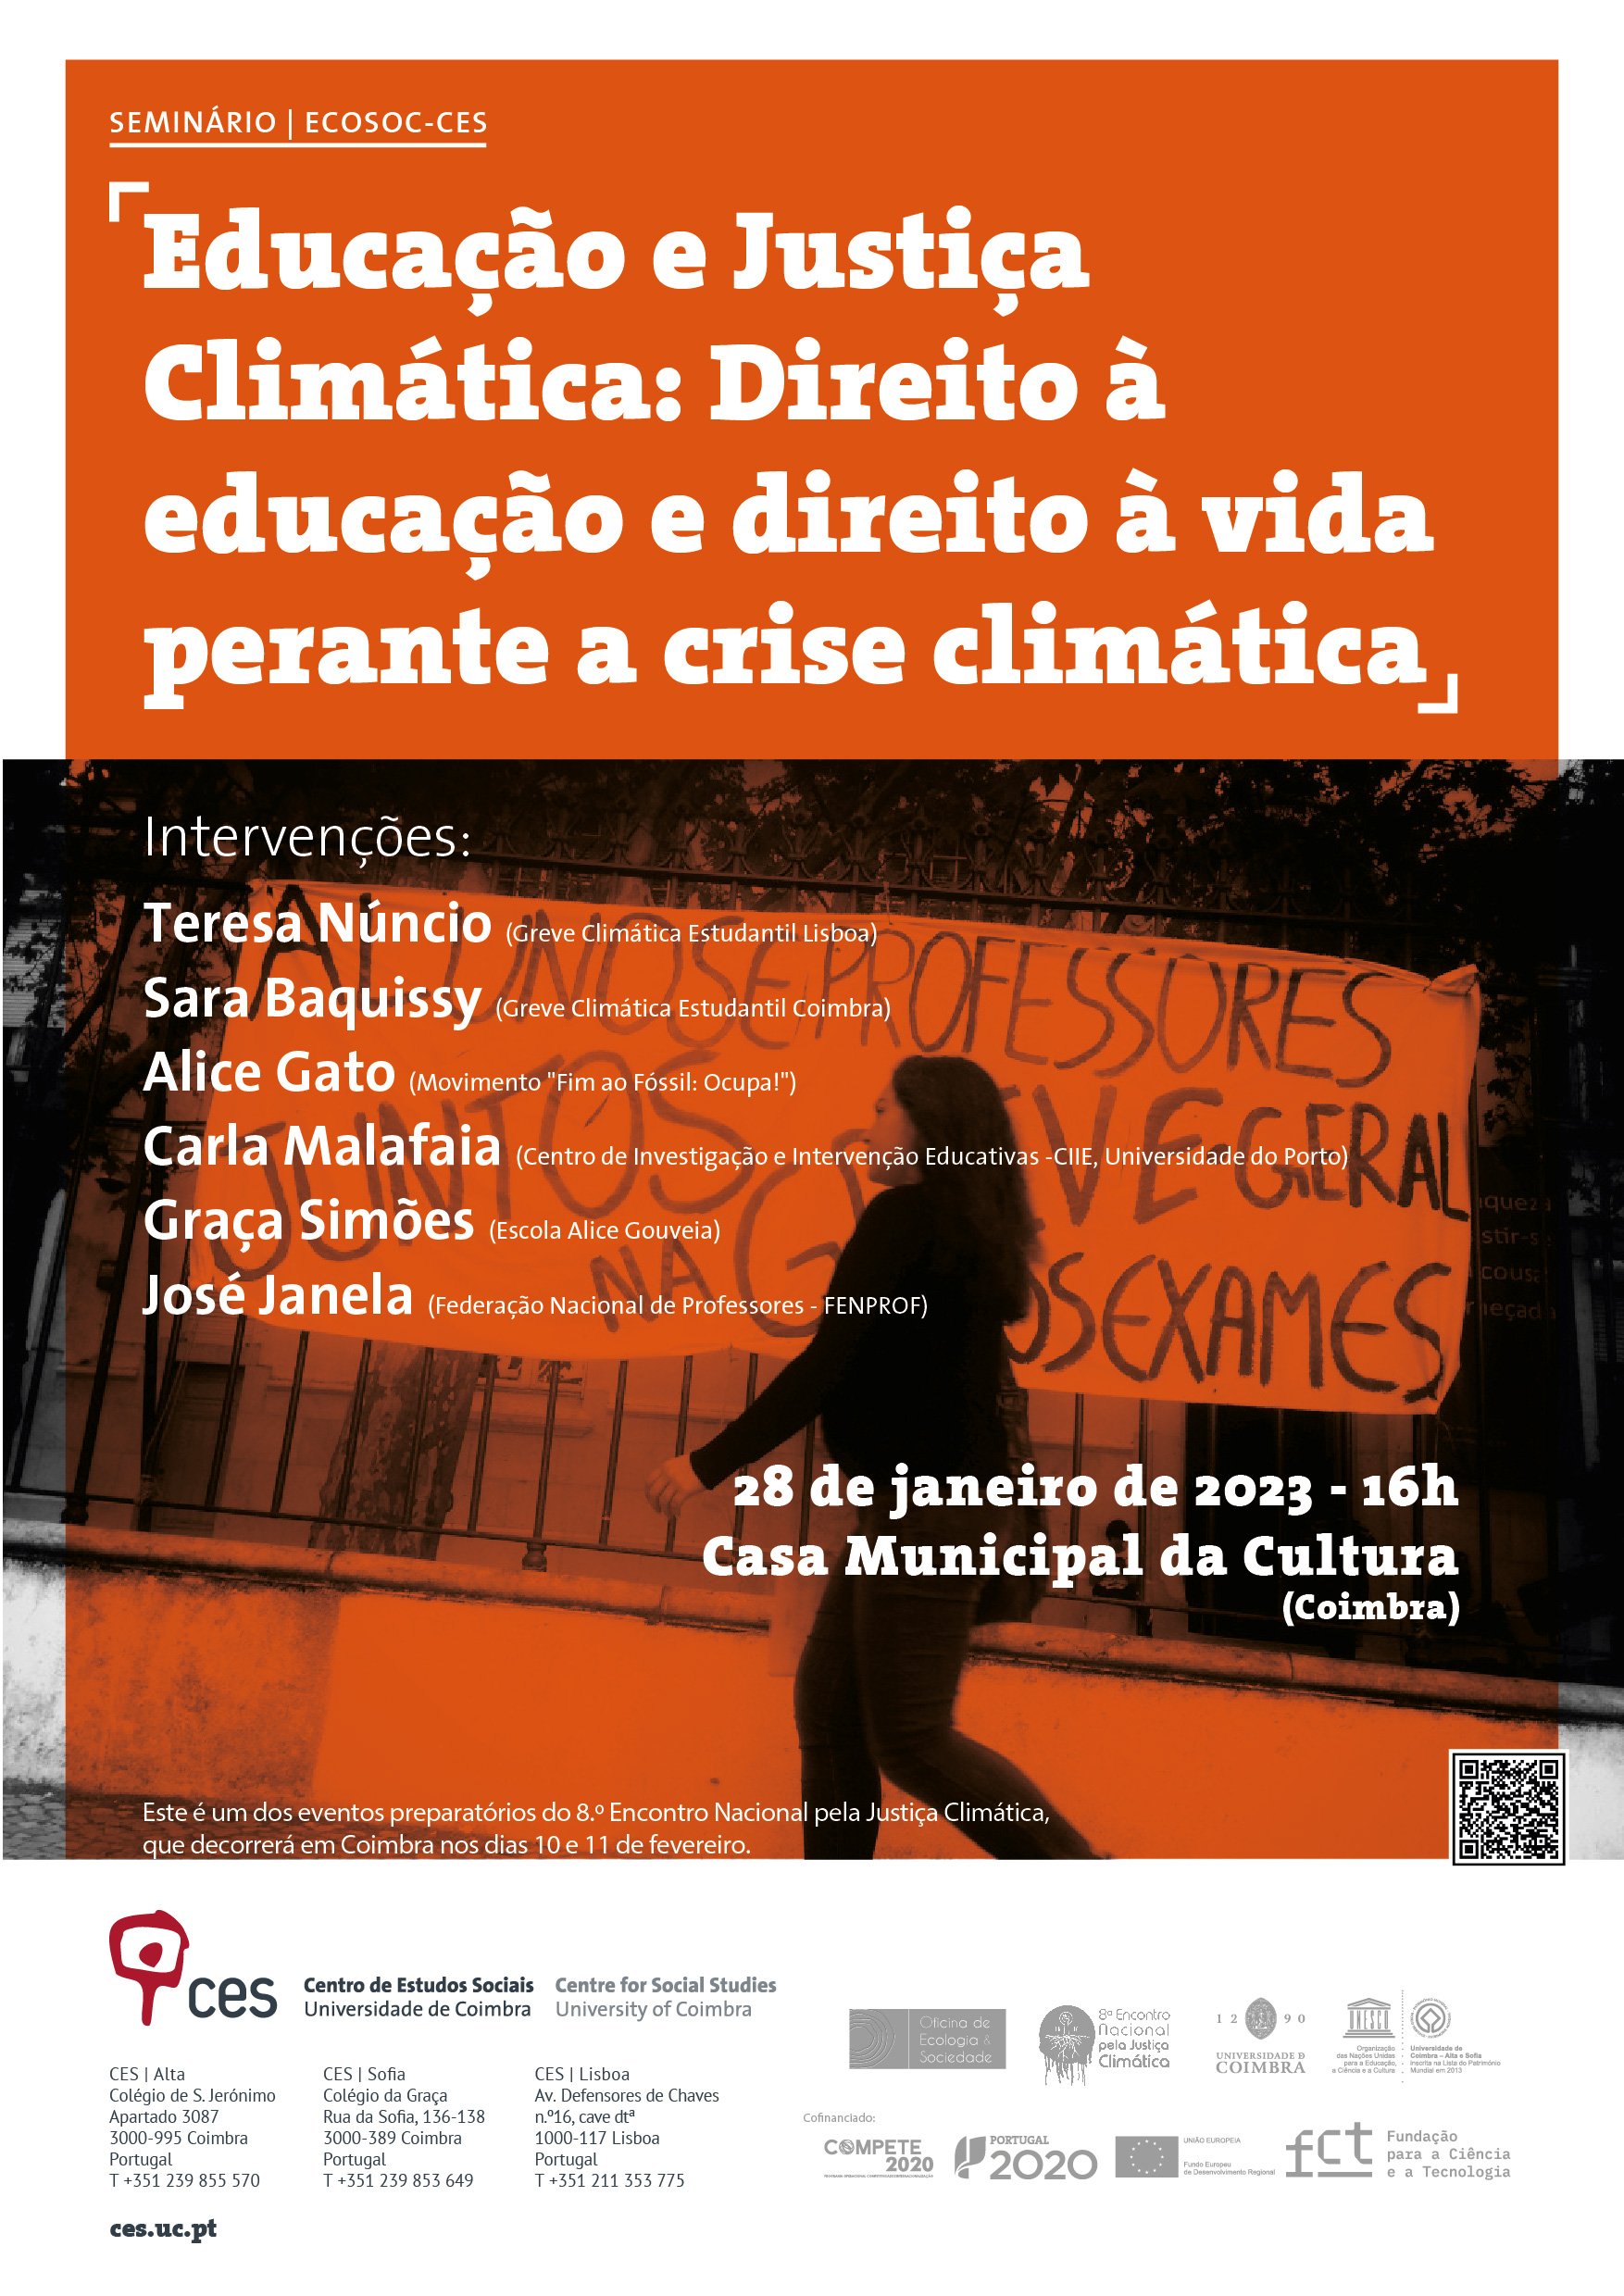 Education and Climate Justice: Right to education and right to life in the face of climate crisis<span id="edit_41787"><script>$(function() { $('#edit_41787').load( "/myces/user/editobj.php?tipo=evento&id=41787" ); });</script></span>